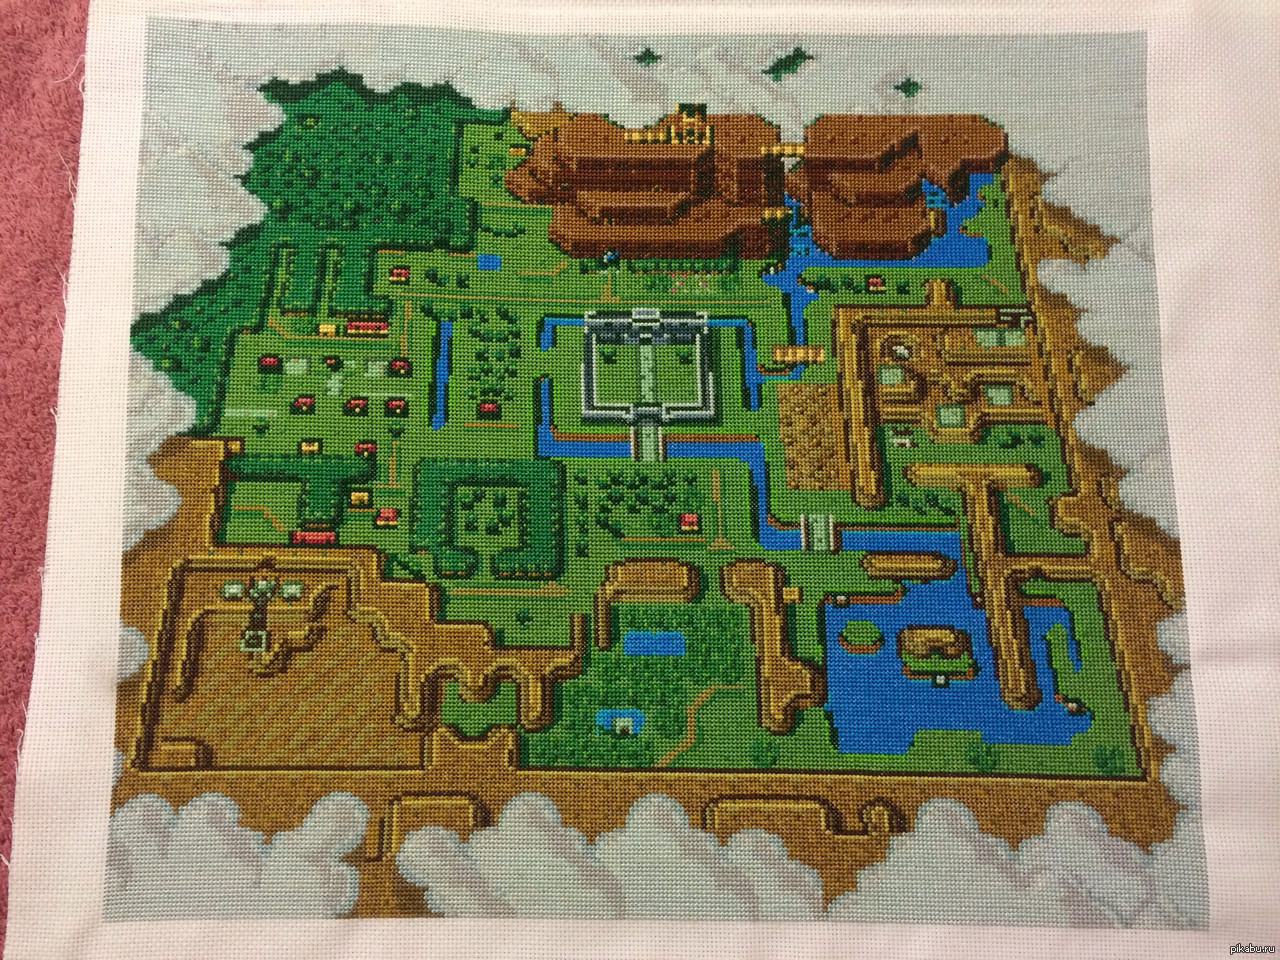 The world of the past be. The Legend of Zelda a link to the past карта. The Legend of Zelda link's Awakening карта. The Legend of Zelda 1986 Map.